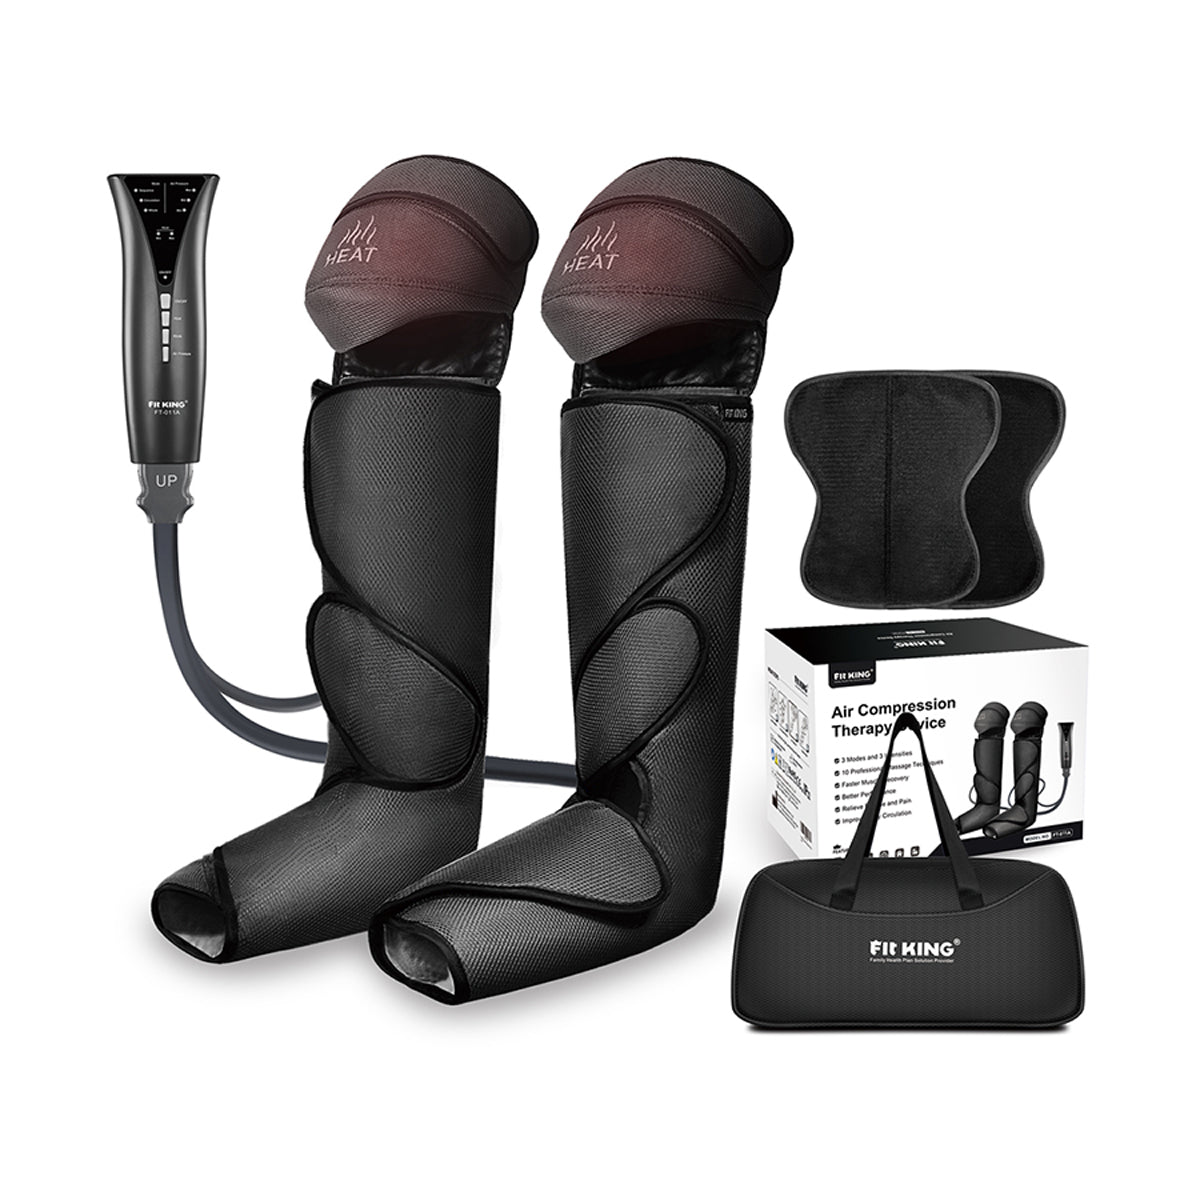 https://www.fitkingshop.com/products/ft-011a-leg-foot-massager-with-knee-heat